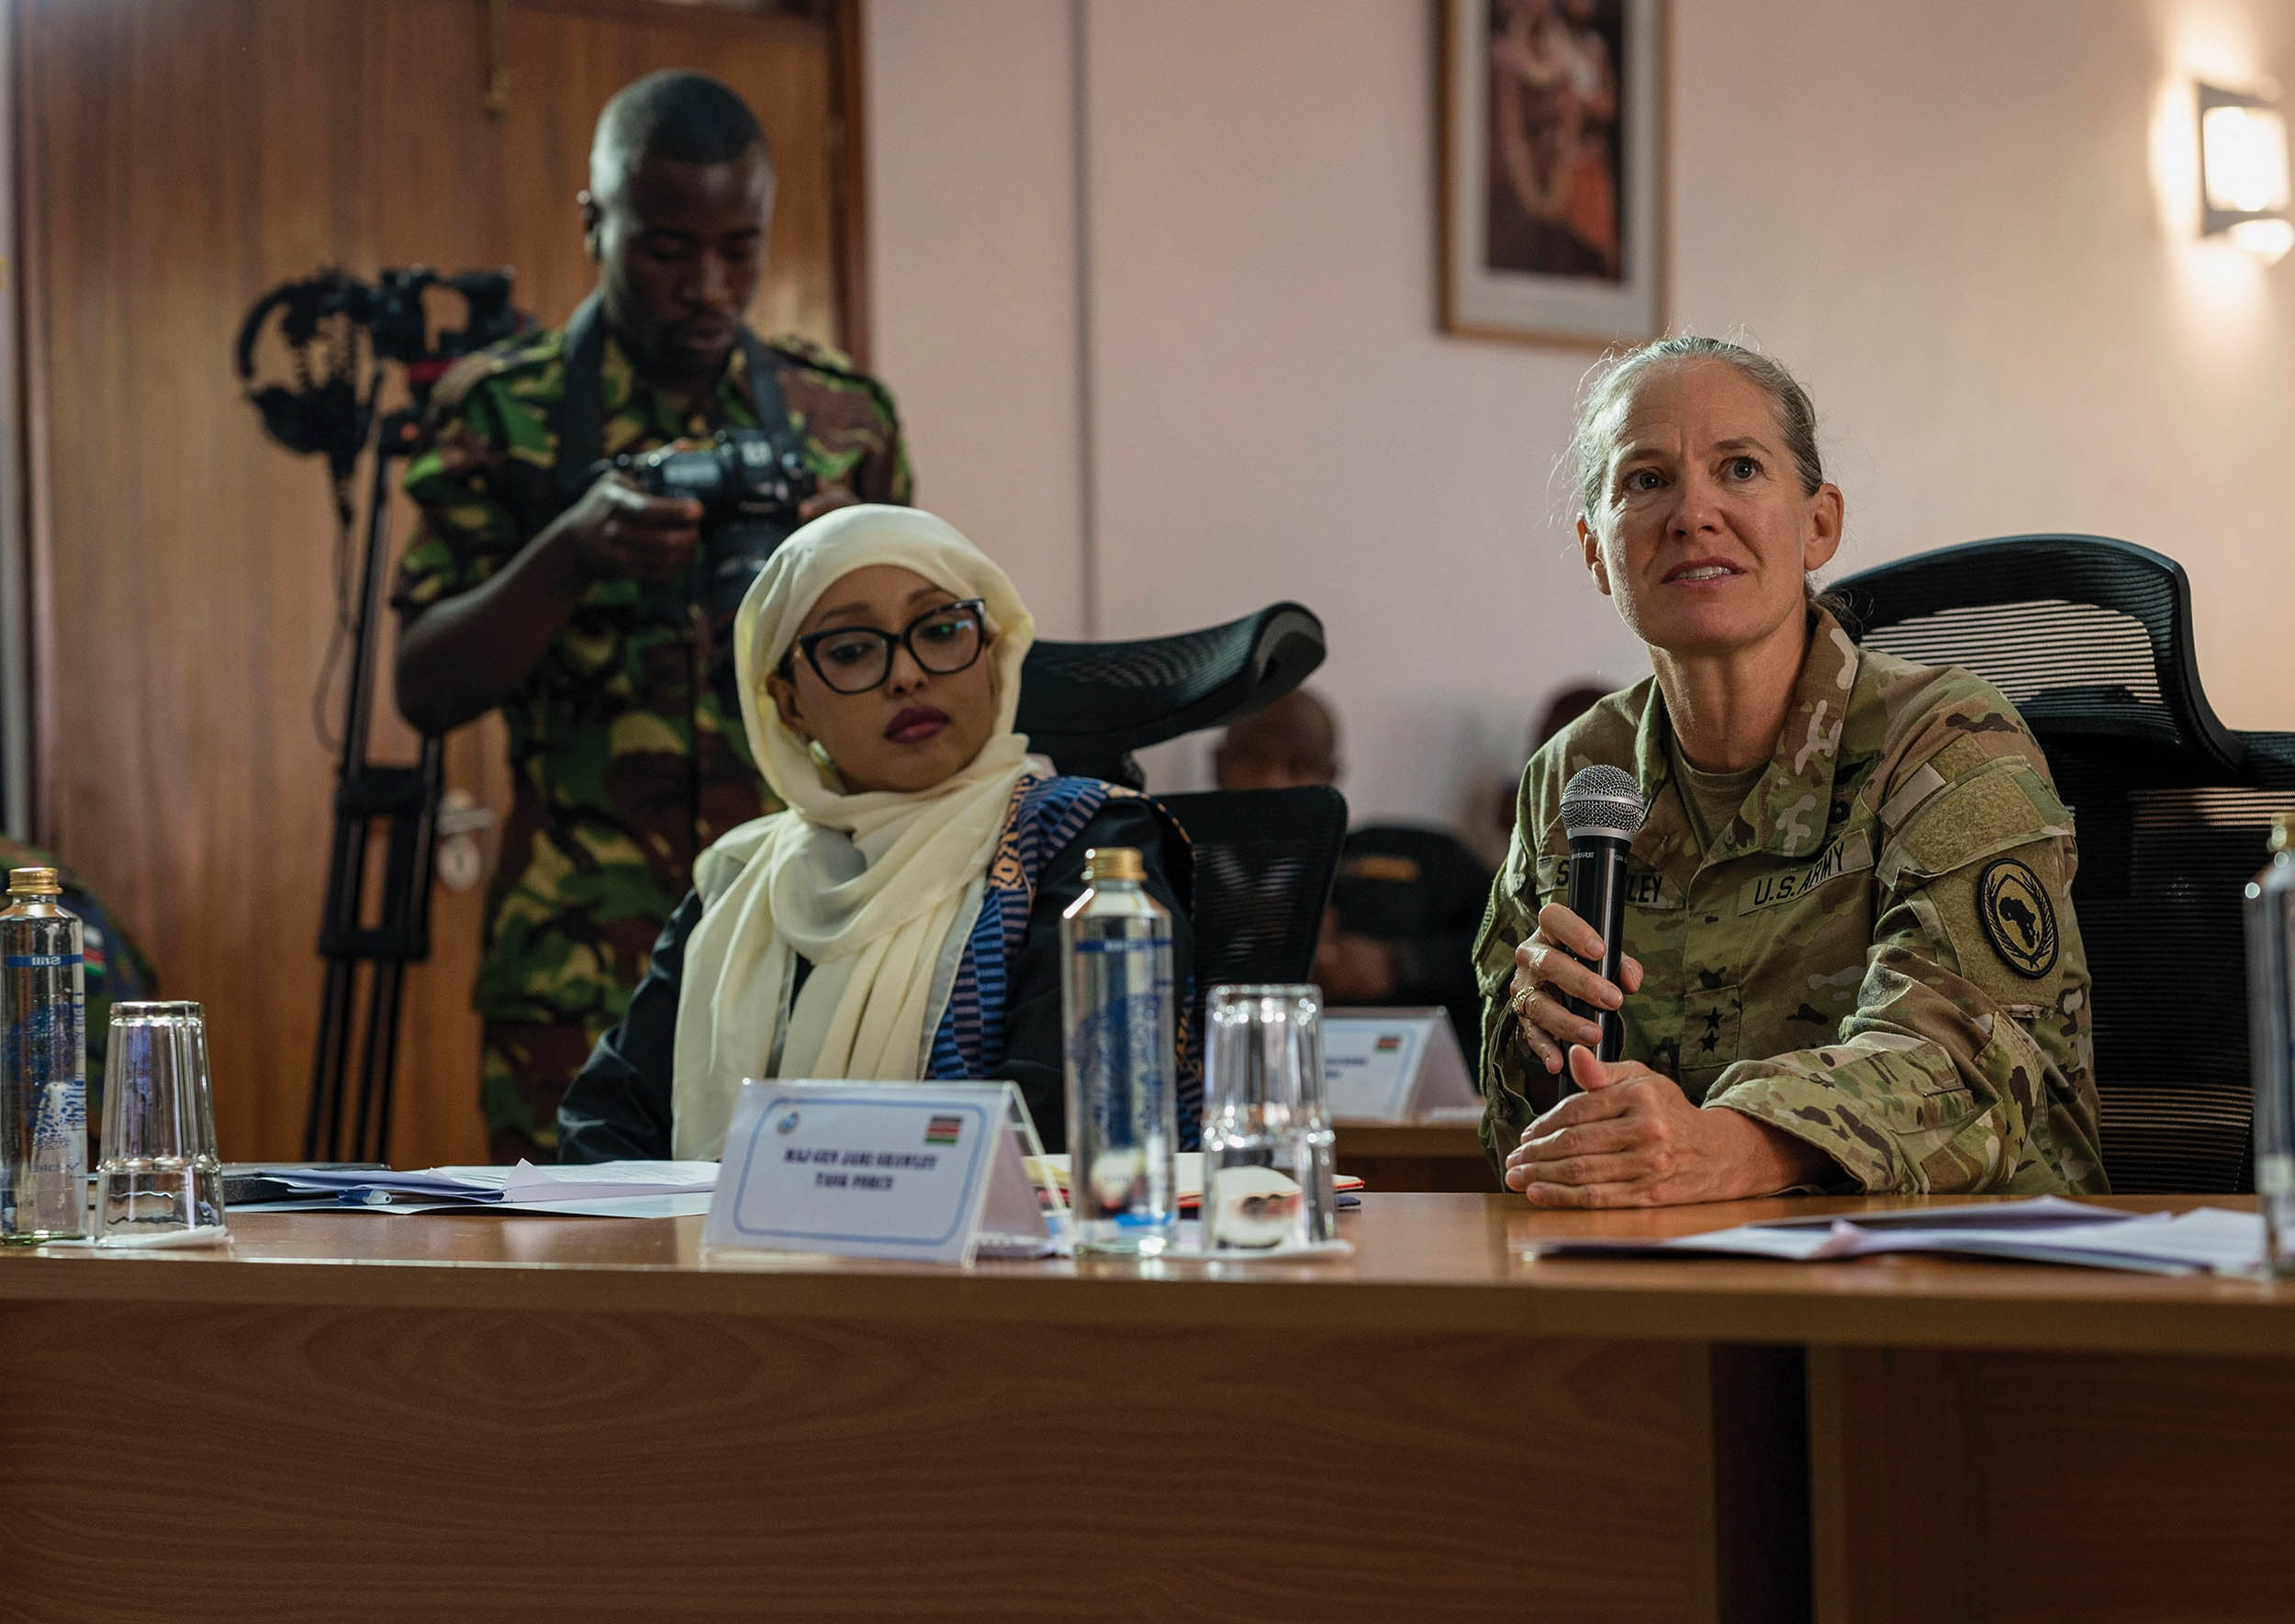 Army Major General Jami Shawley, Commanding General of Combined Joint Task Force–Horn of Africa, conveys importance of including women in discussion of security during Women, Peace, and Security Conference, March 21, 2023, in Nairobi, Kenya (U.S. Air Force/Rachel L. VanZale)